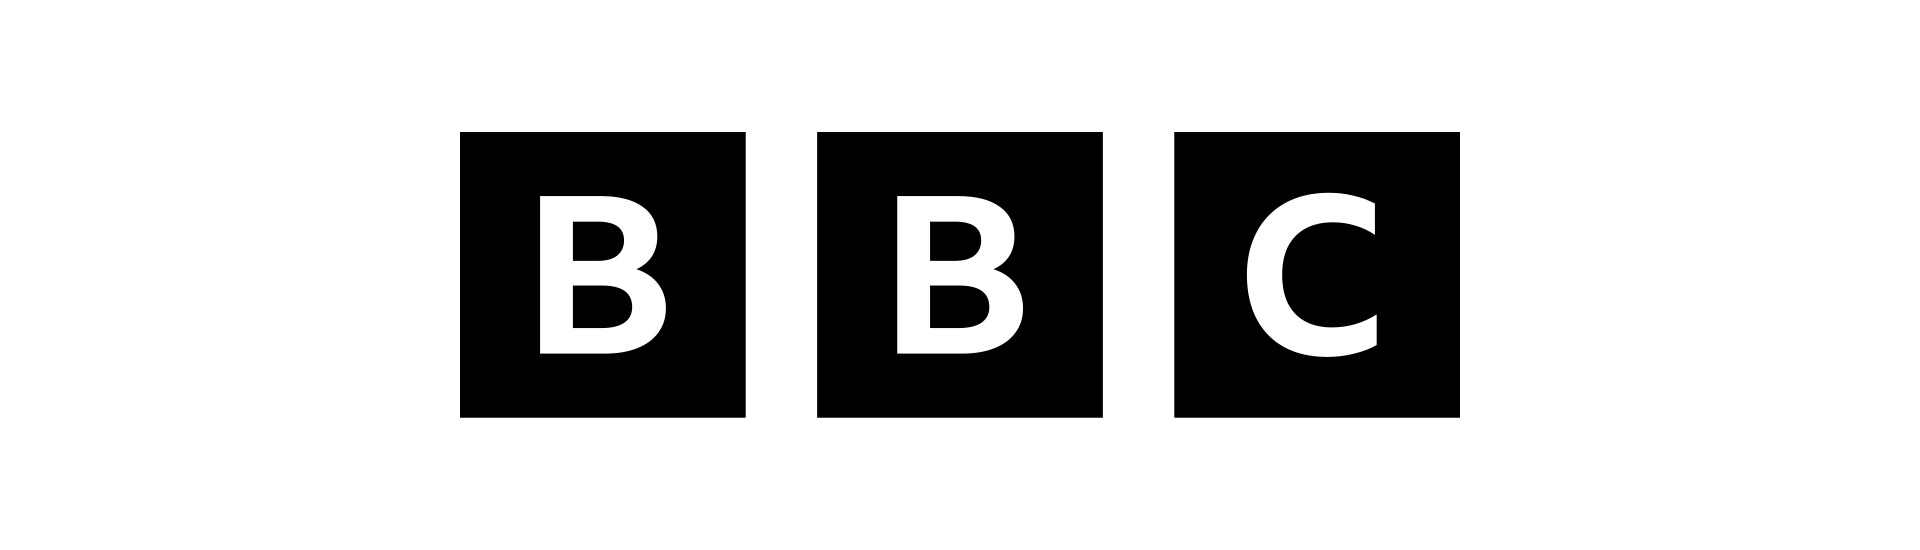 Image for BBC